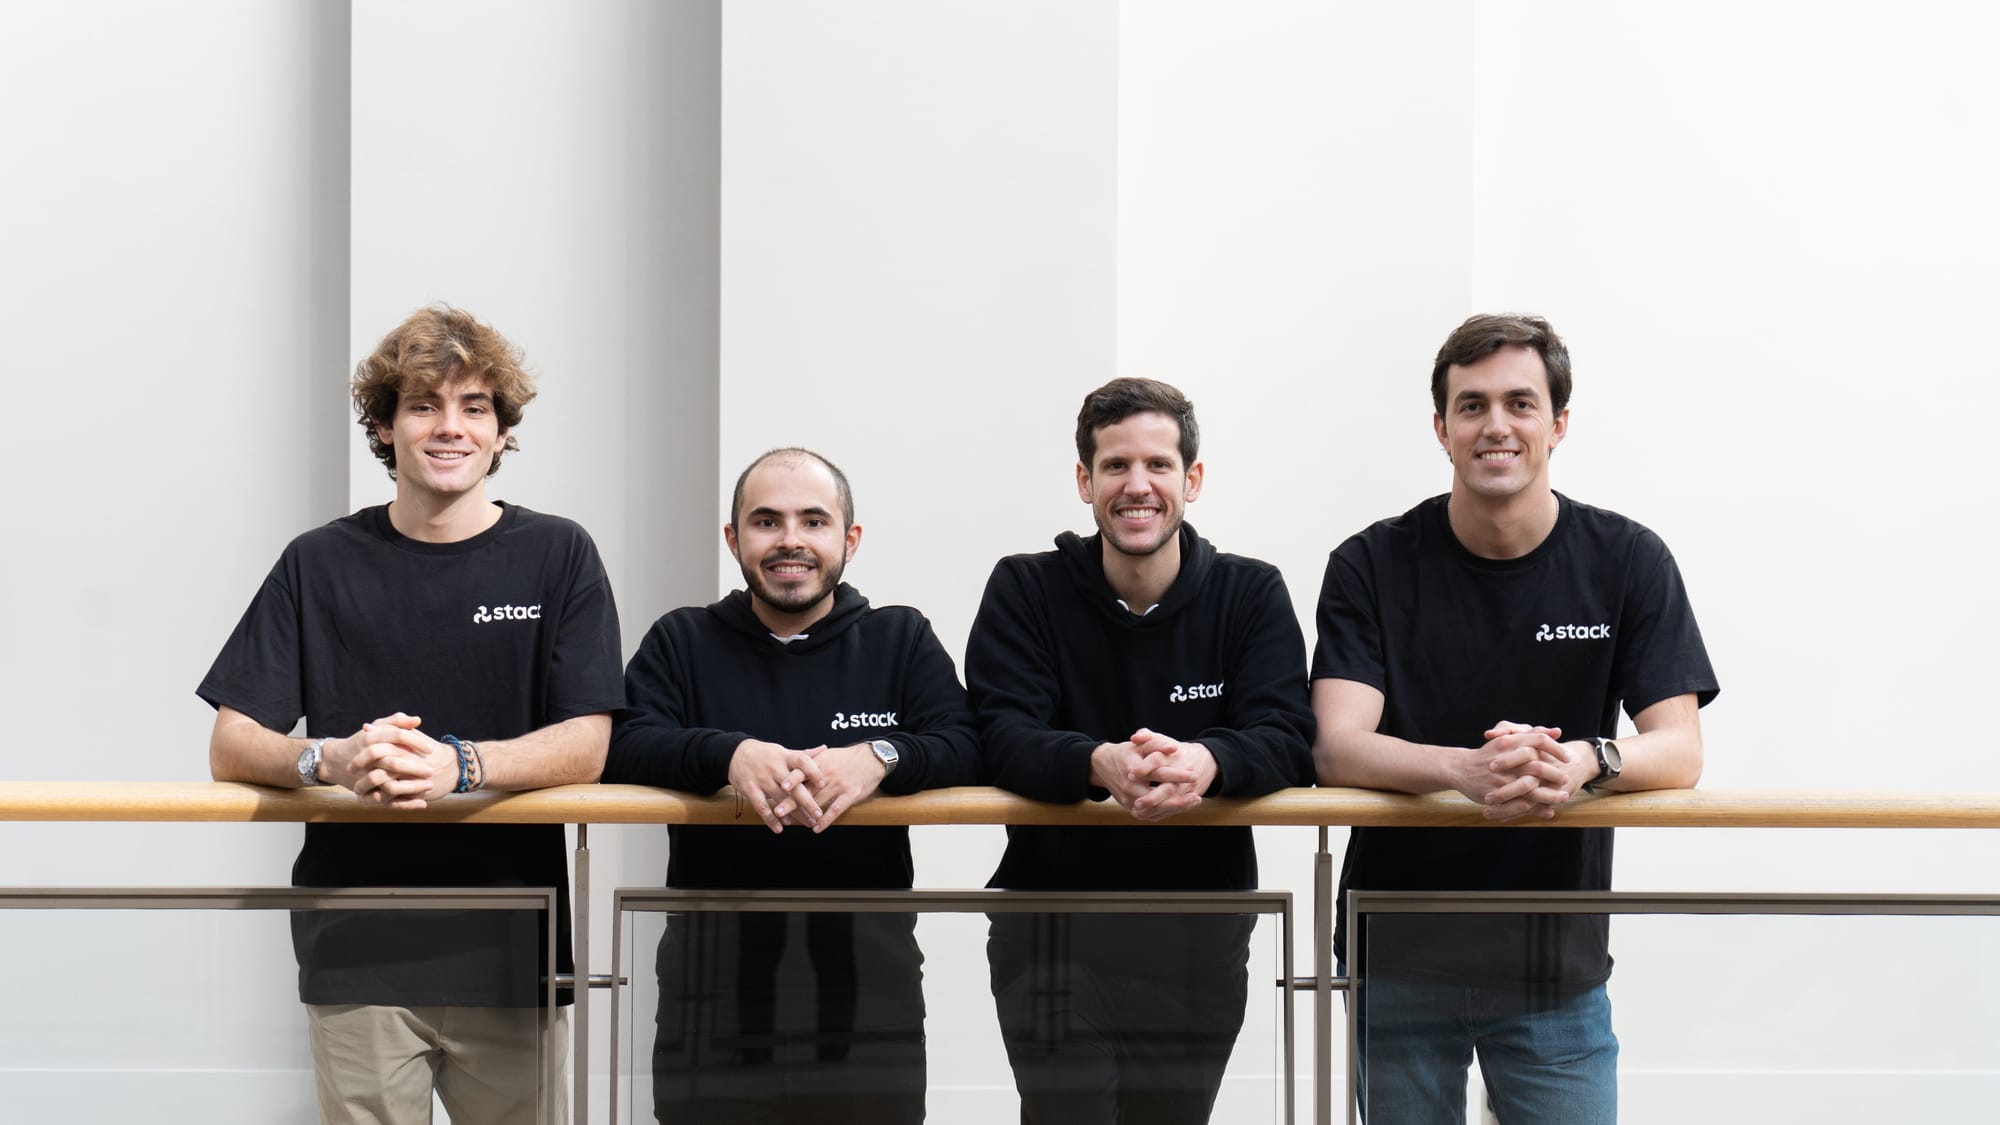 Stack AI raised $3M to connect the latest AI innovations with the most urgent applications